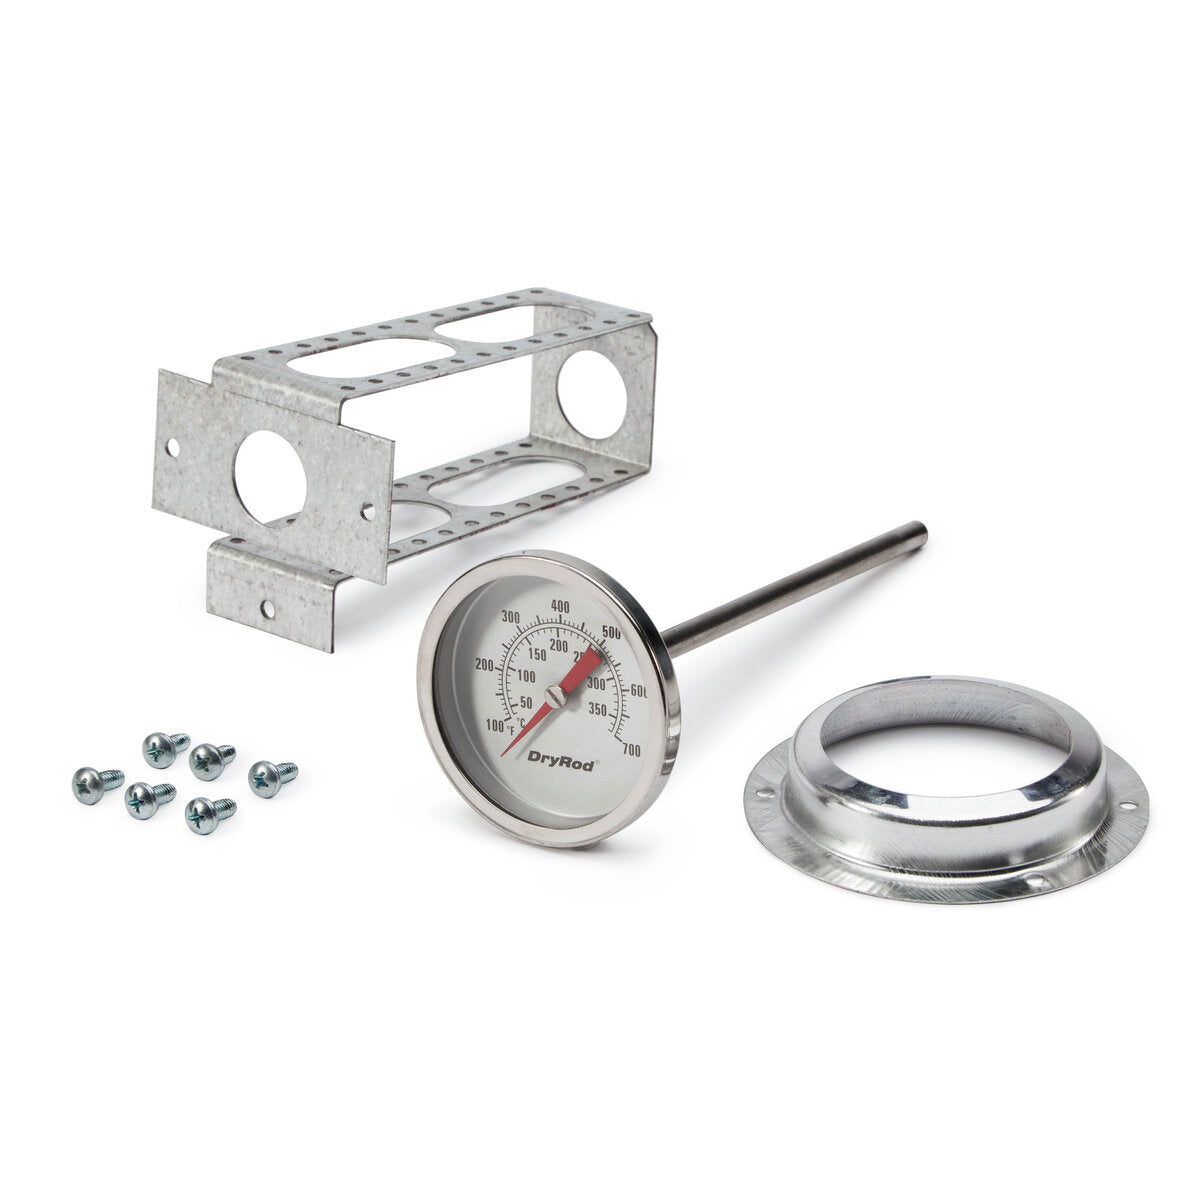 Lincoln Electric - Rod Oven - Optional Thermometer Kit - K3148-1